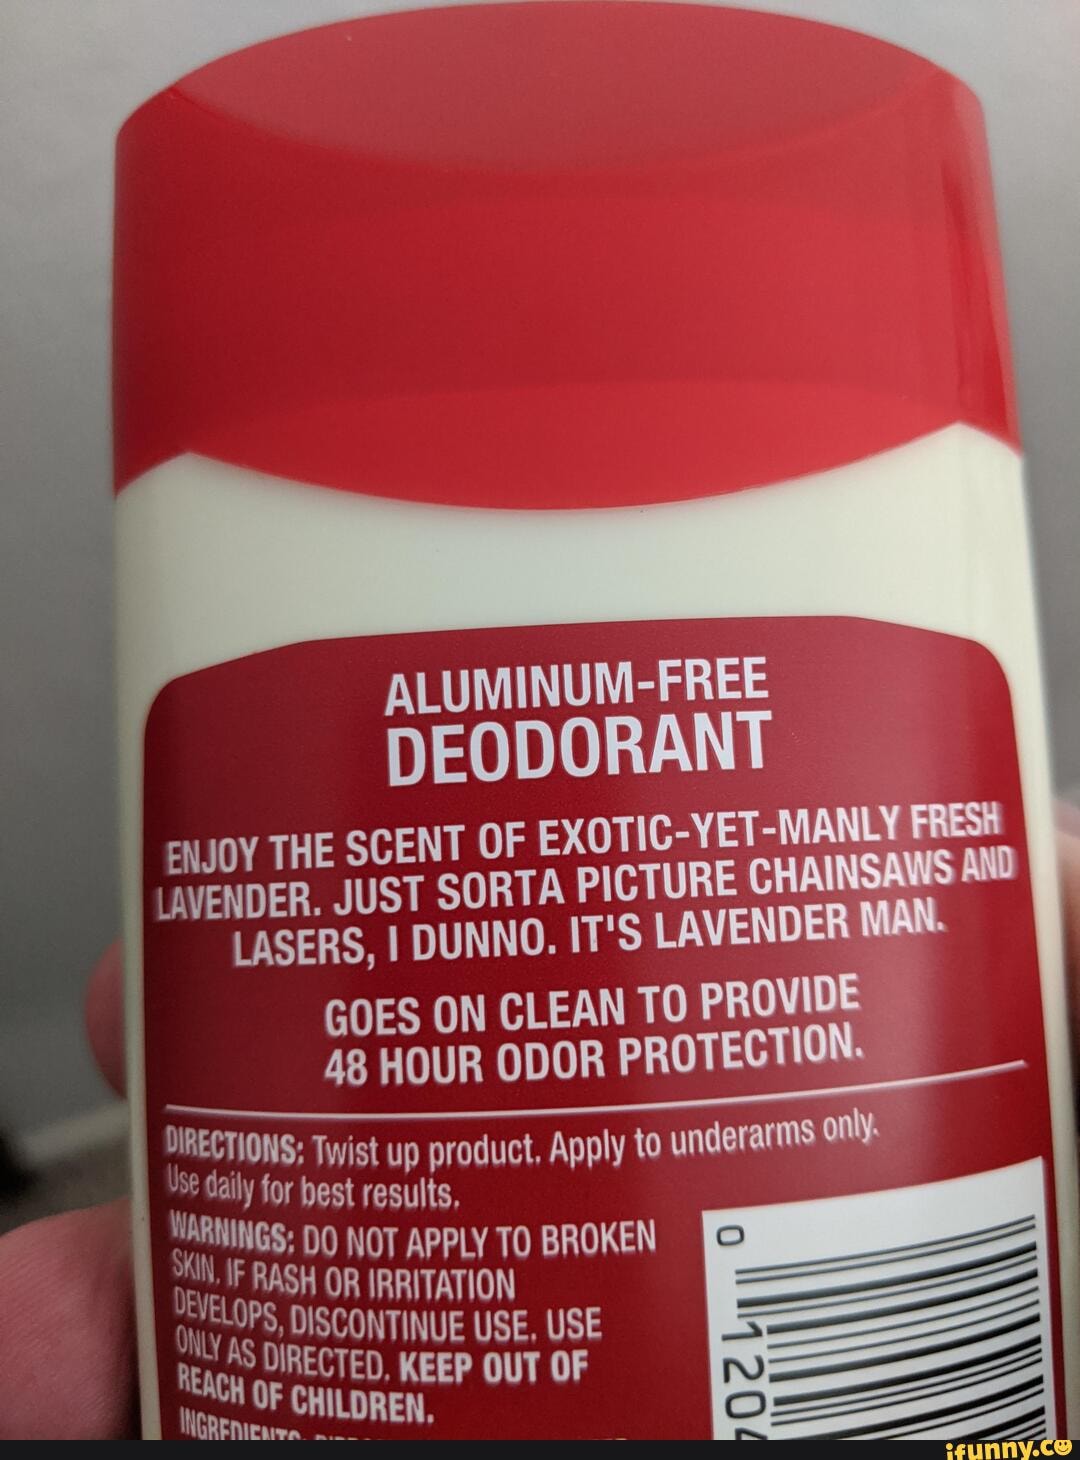 ALUMINUMFREE DEODORANT THE SCENT OF EXOTICYETMANLY